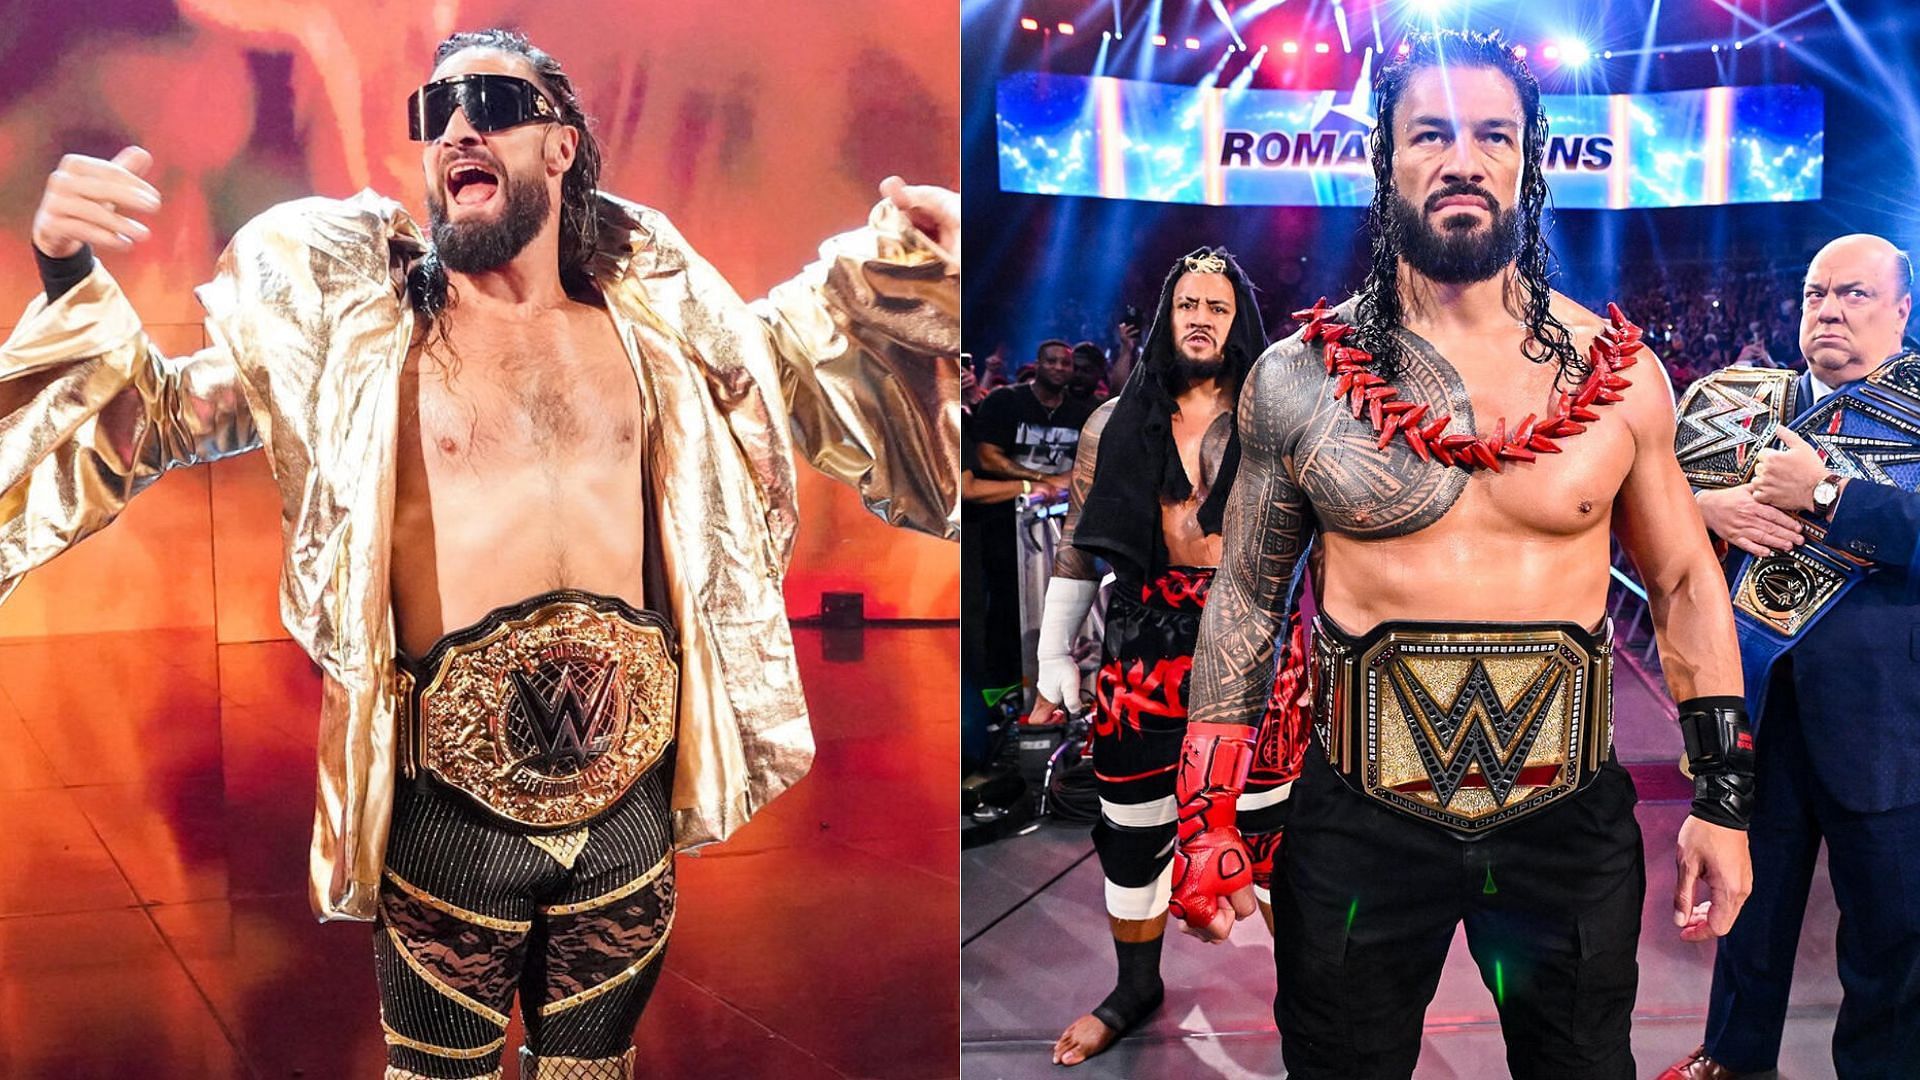 Seth Rollins (left); Solo Sikoa, Roman Reigns, and Paul Heyman (right)